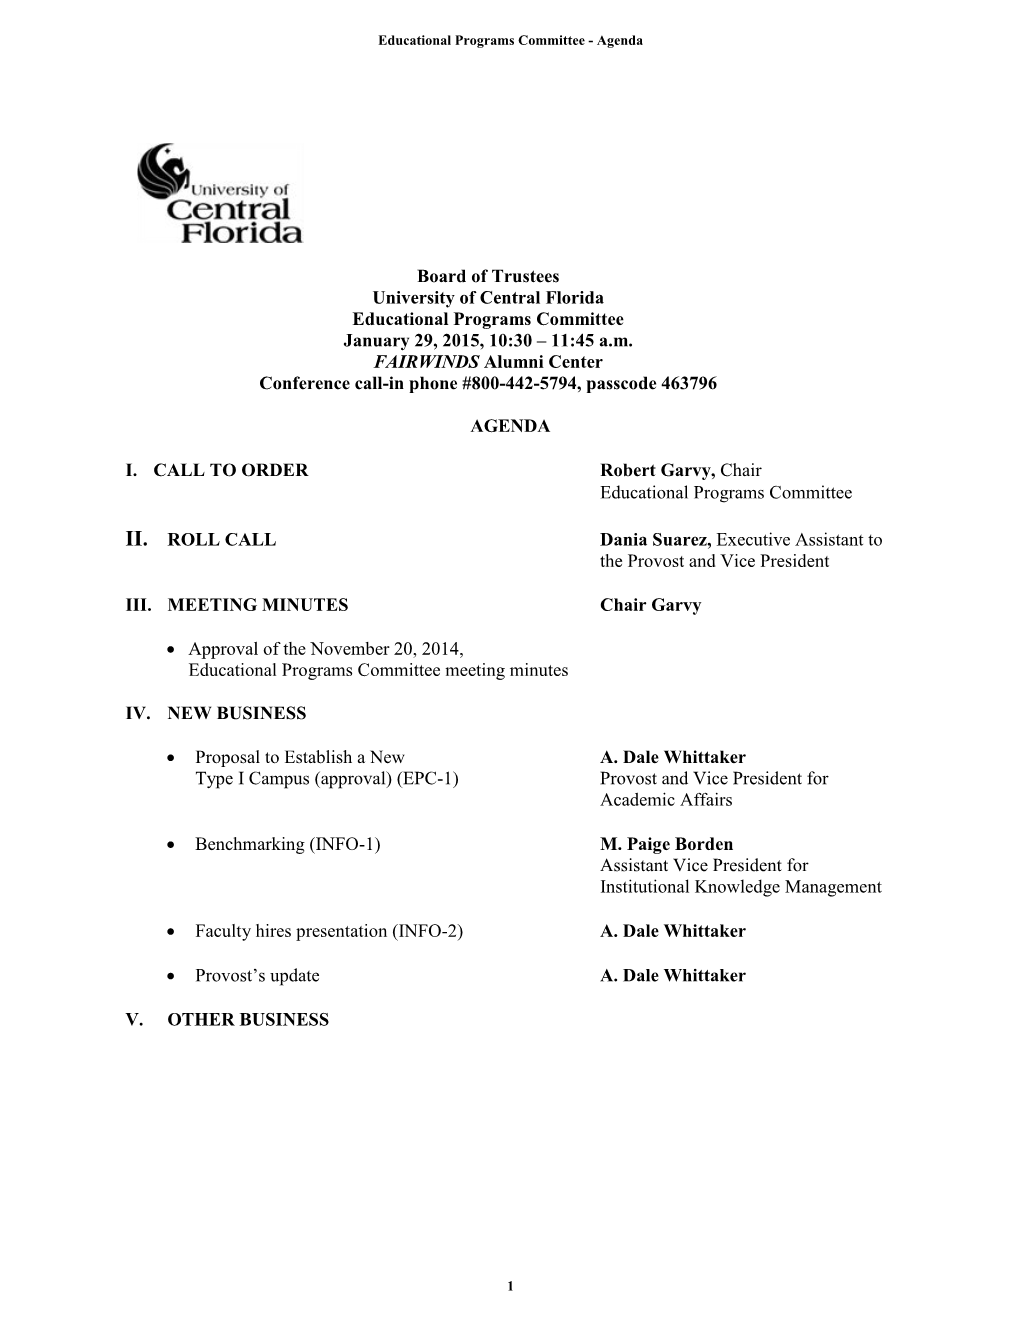 Board of Trustees University of Central Florida Educational Programs Committee January 29, 2015, 10:30 – 11:45 A.M. FAIRWINDS